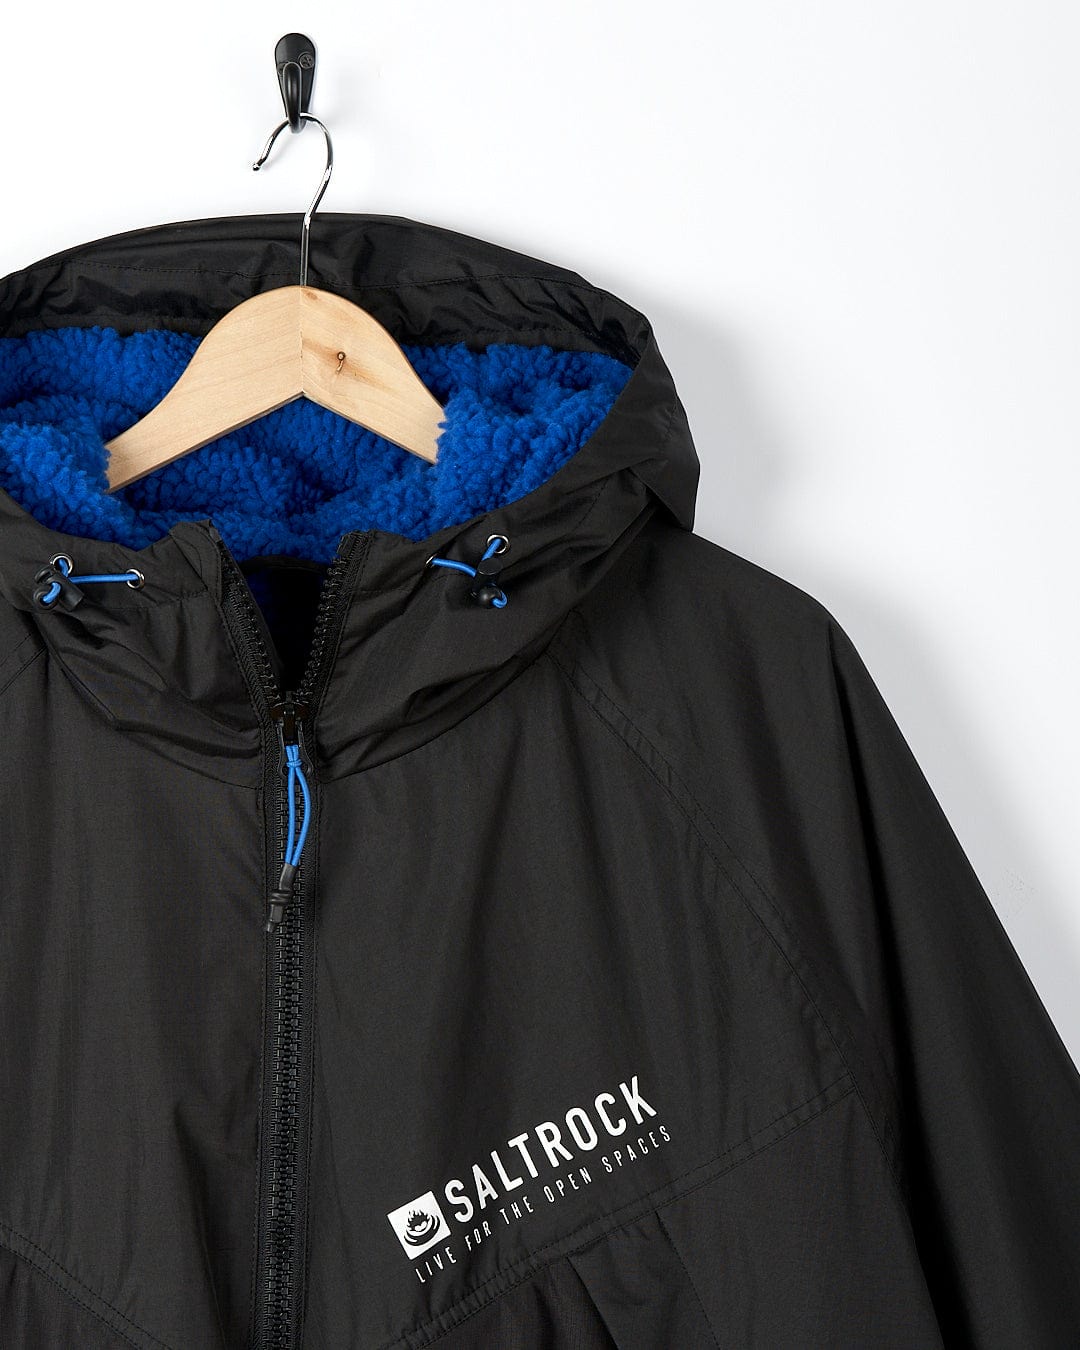 A Saltrock Four Seasons - Waterproof Changing Robe - Black/Blue with a blue hood hanging on a hanger.